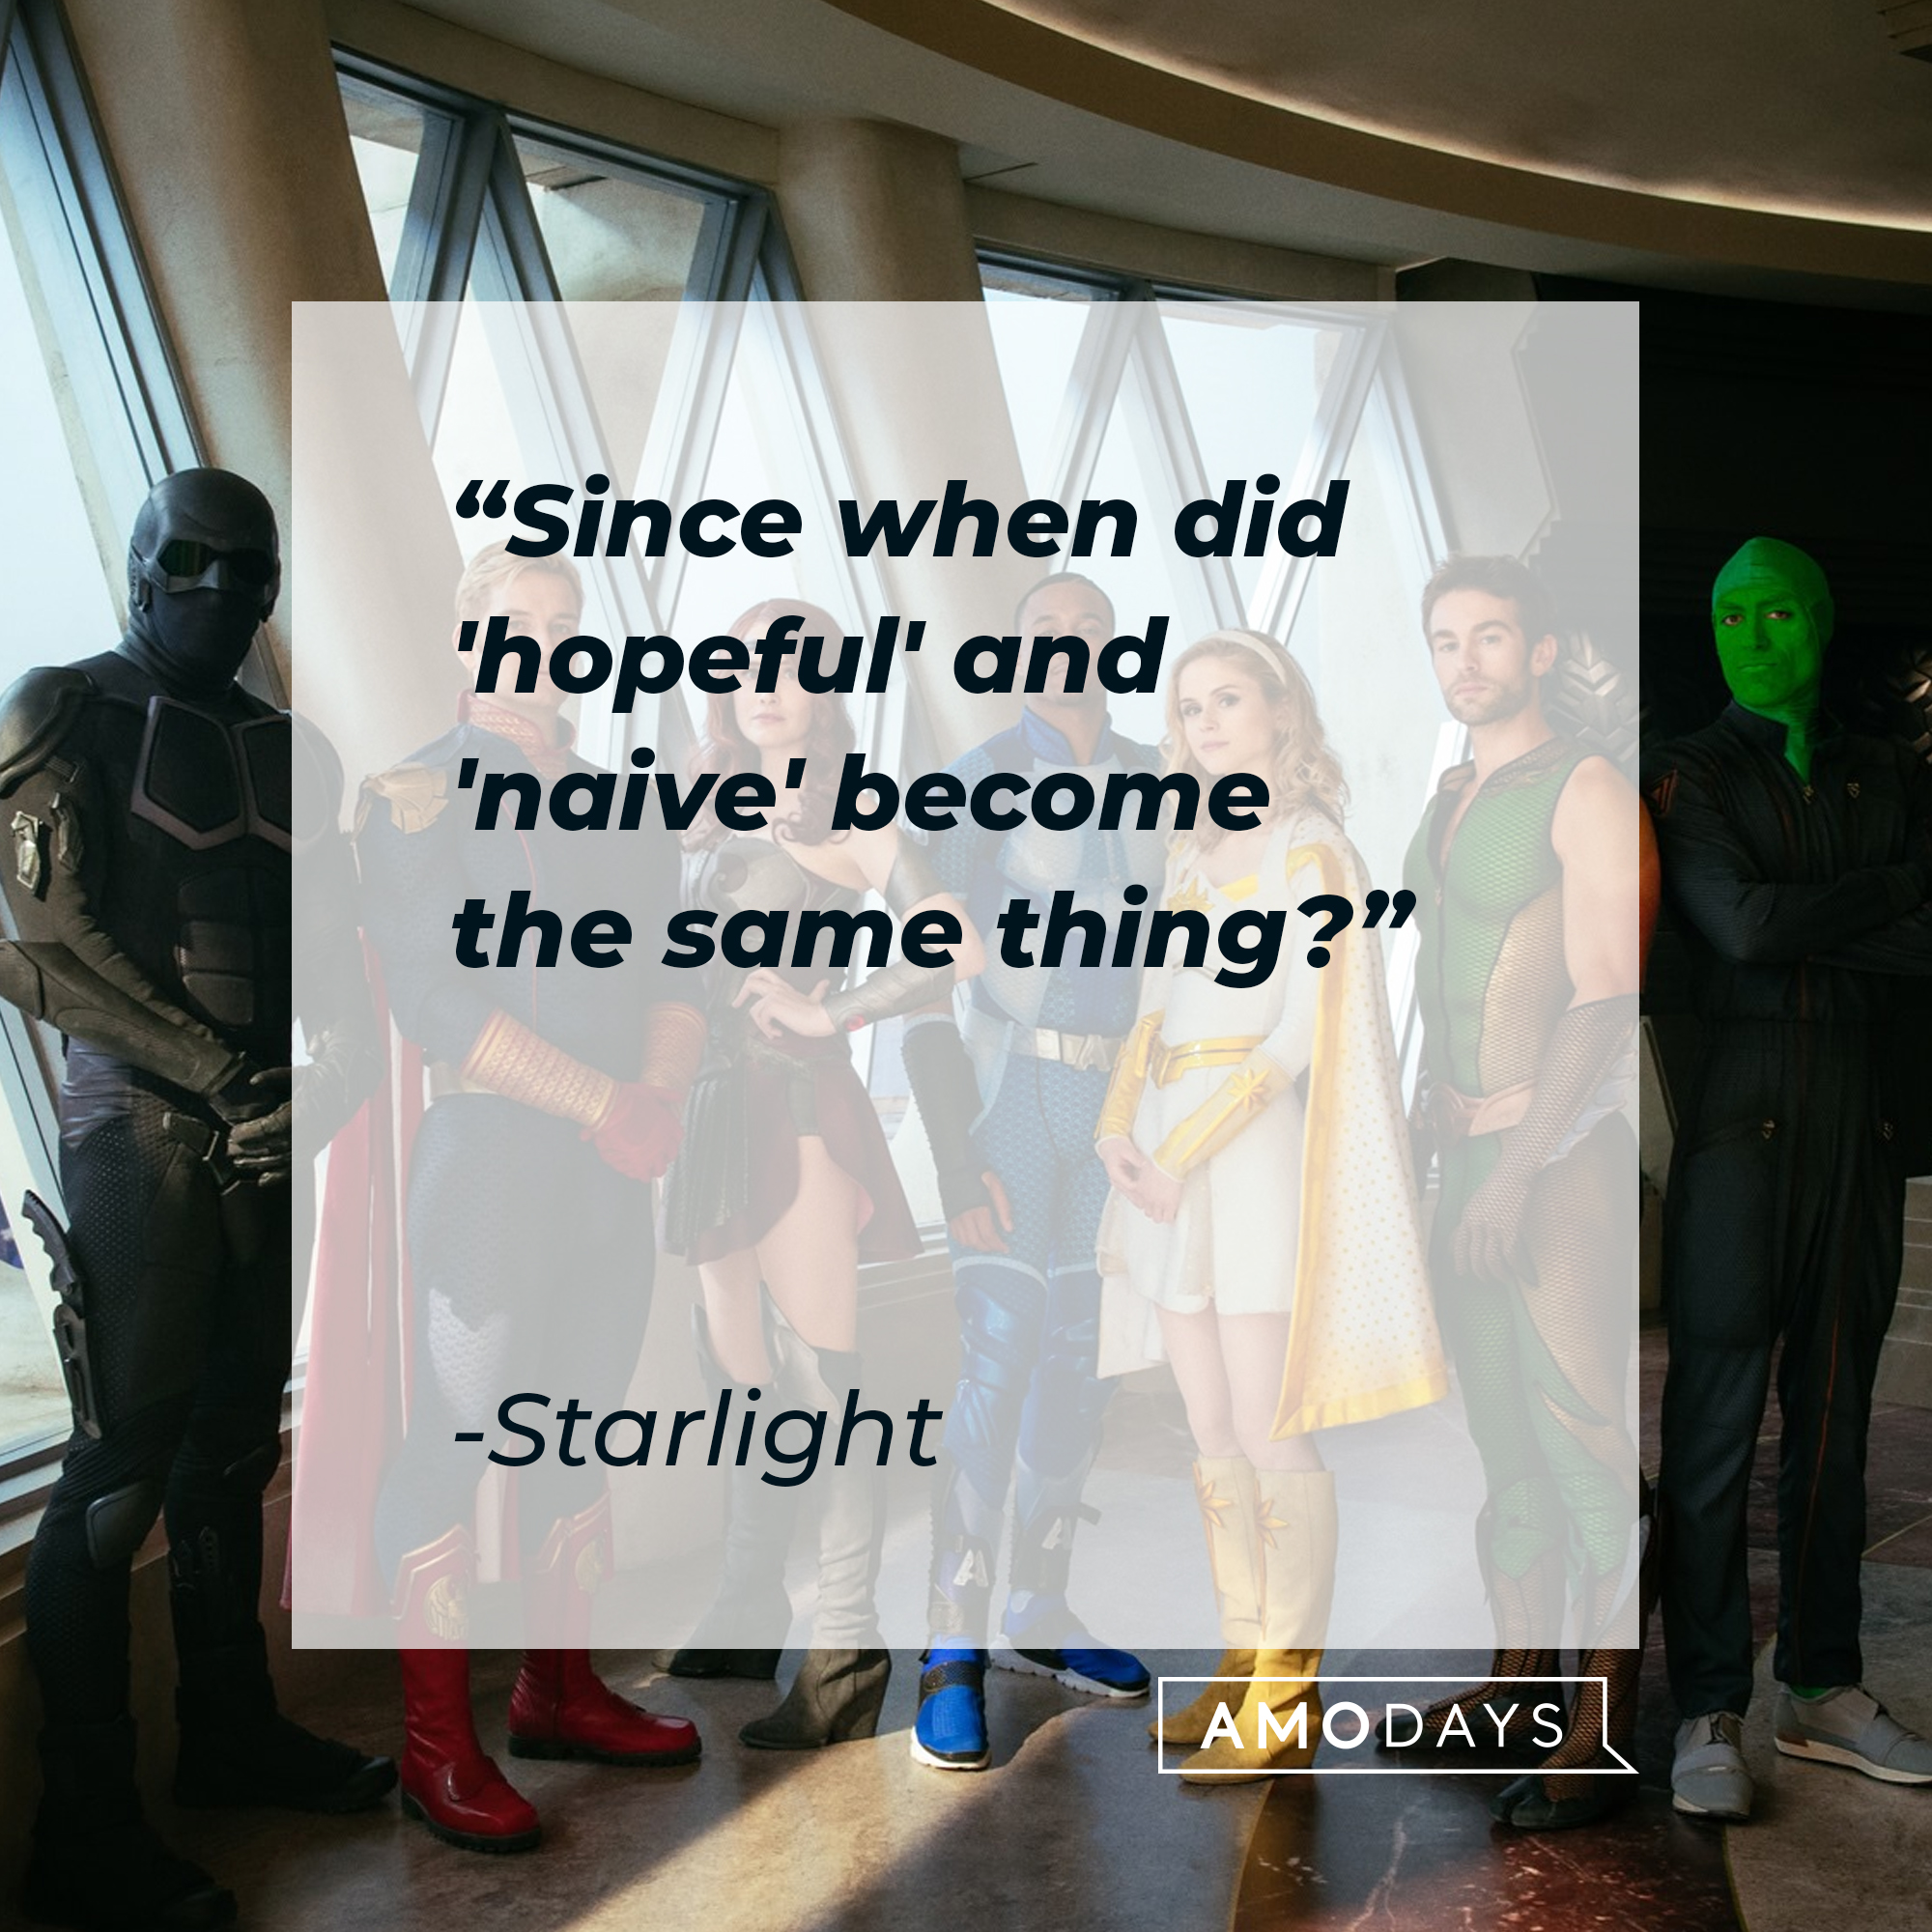 Starlight and other characters, with her quote: "Since when did 'hopeful' and 'naïve' become the same thing?" | Source: facebook.com/TheBoysTV